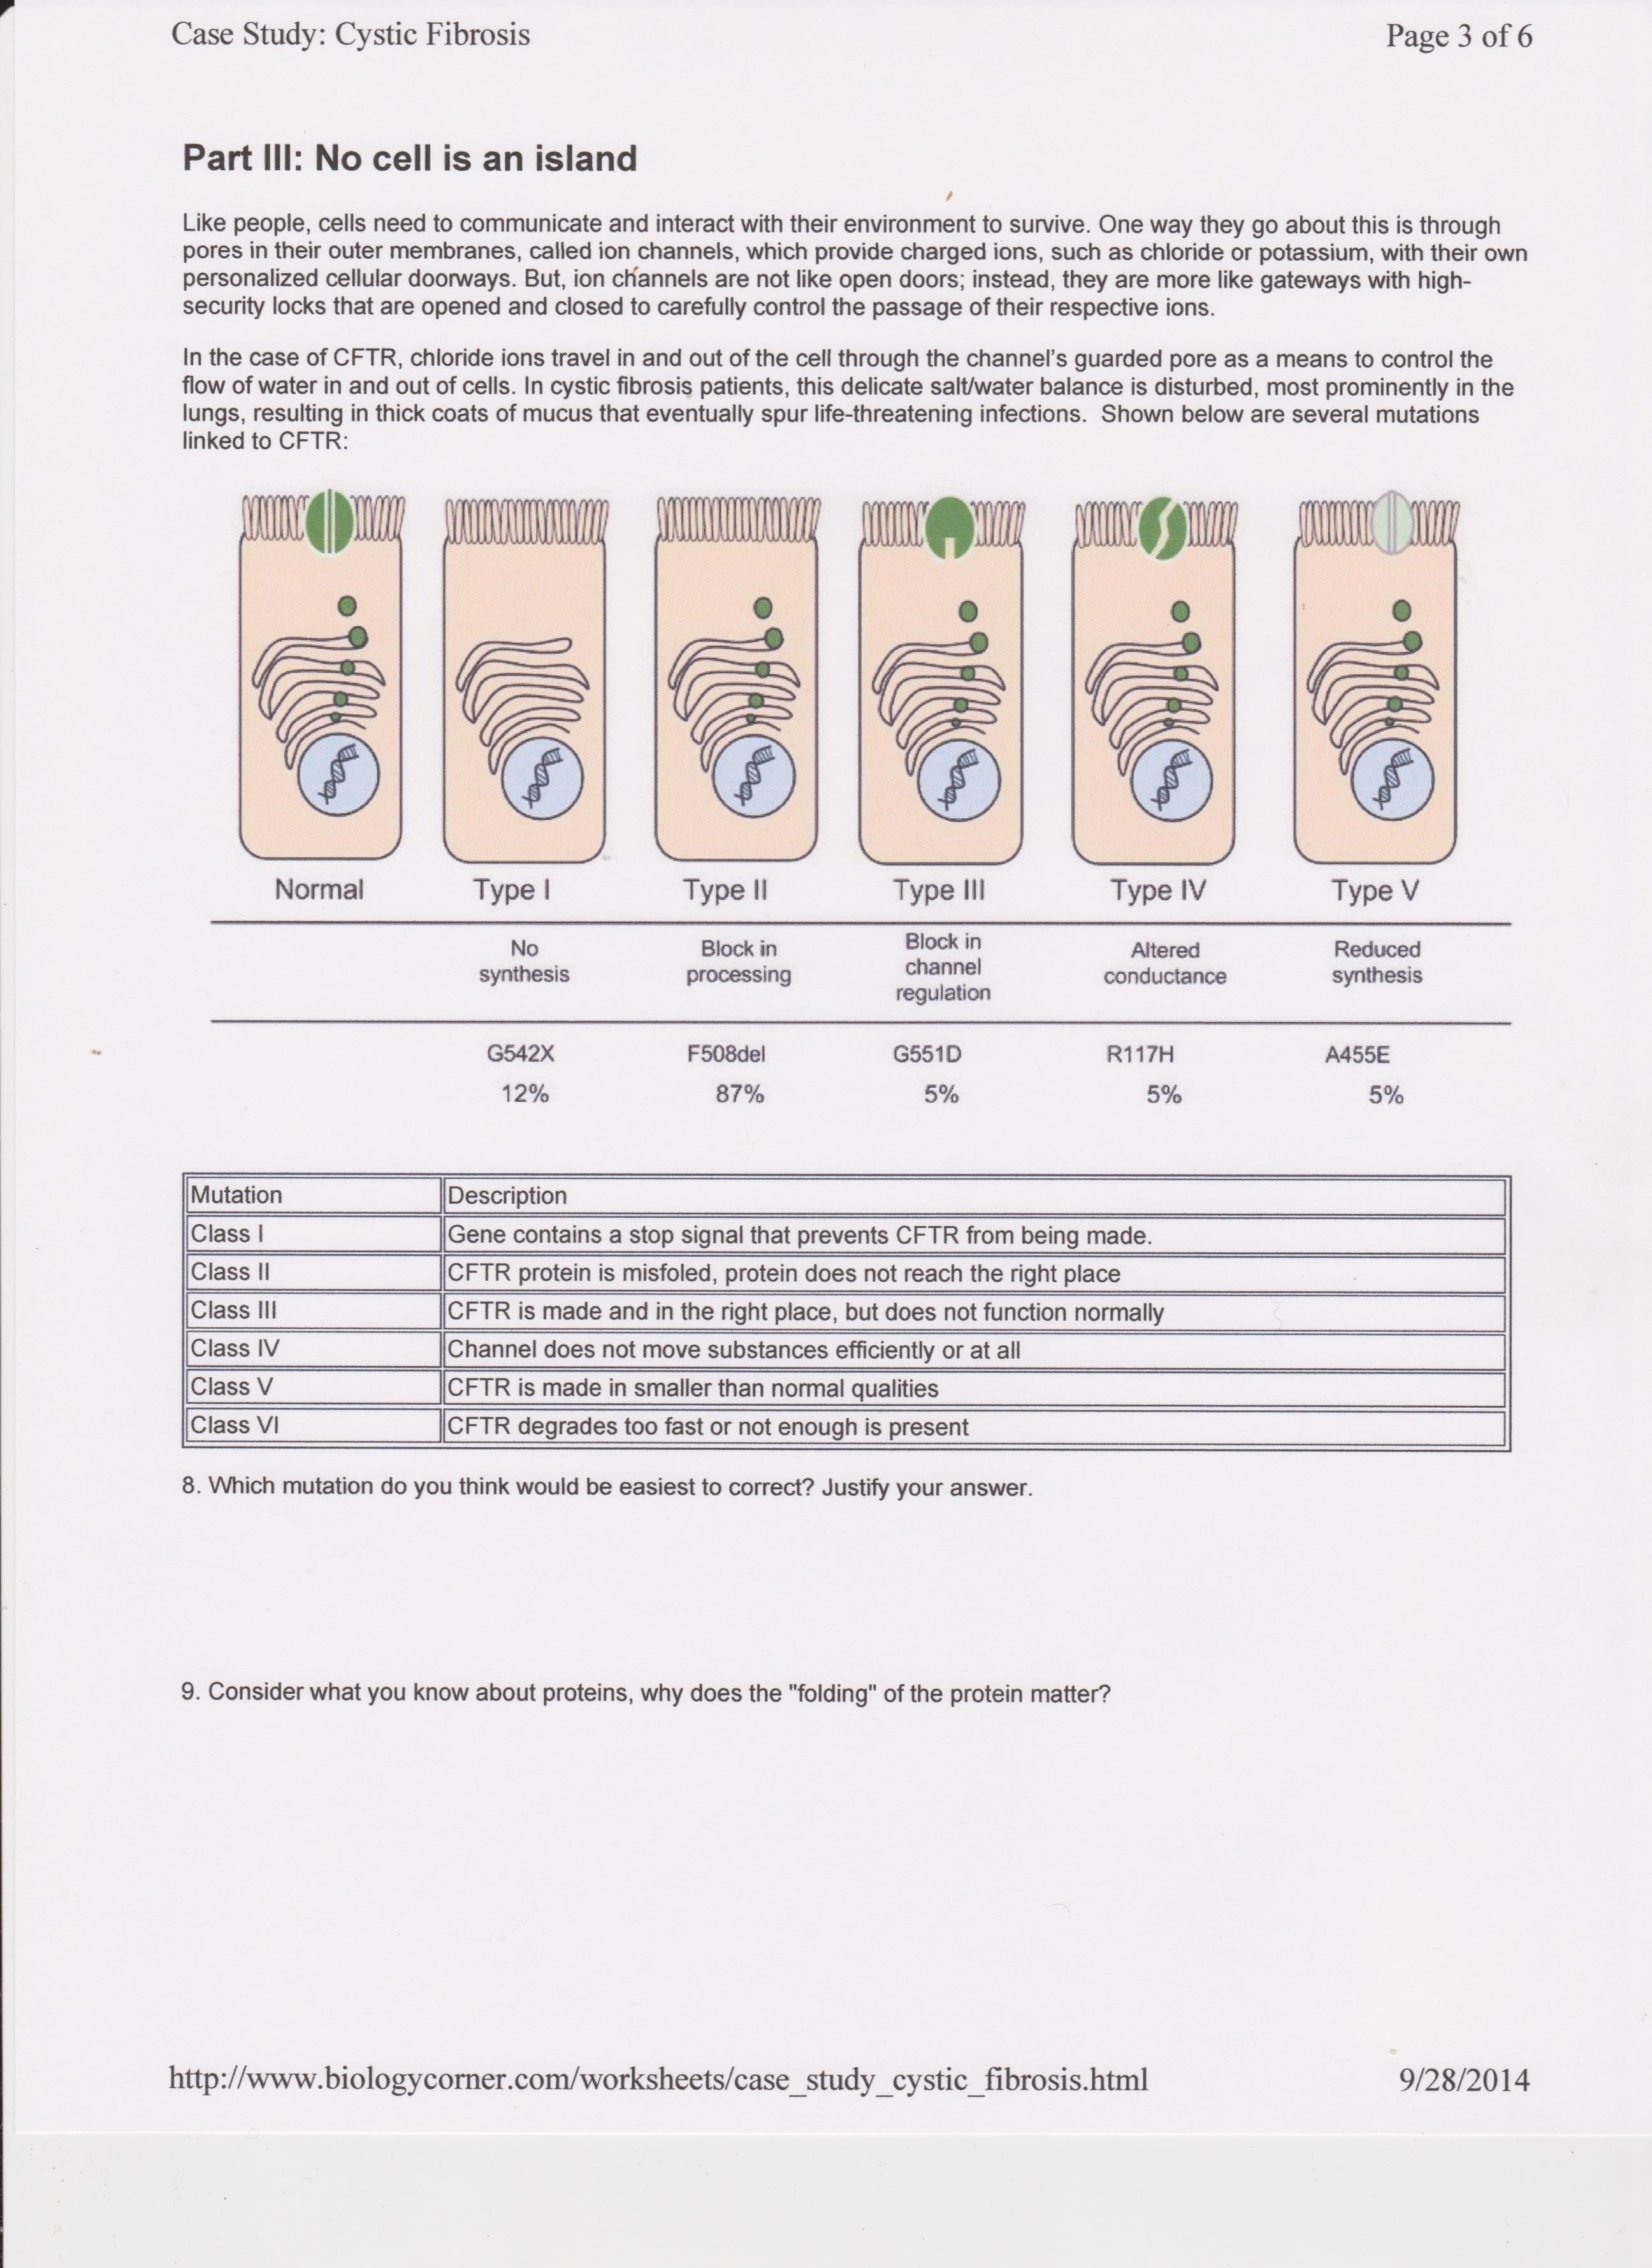 Case Study Cystic Fibrosis Worksheet Answers